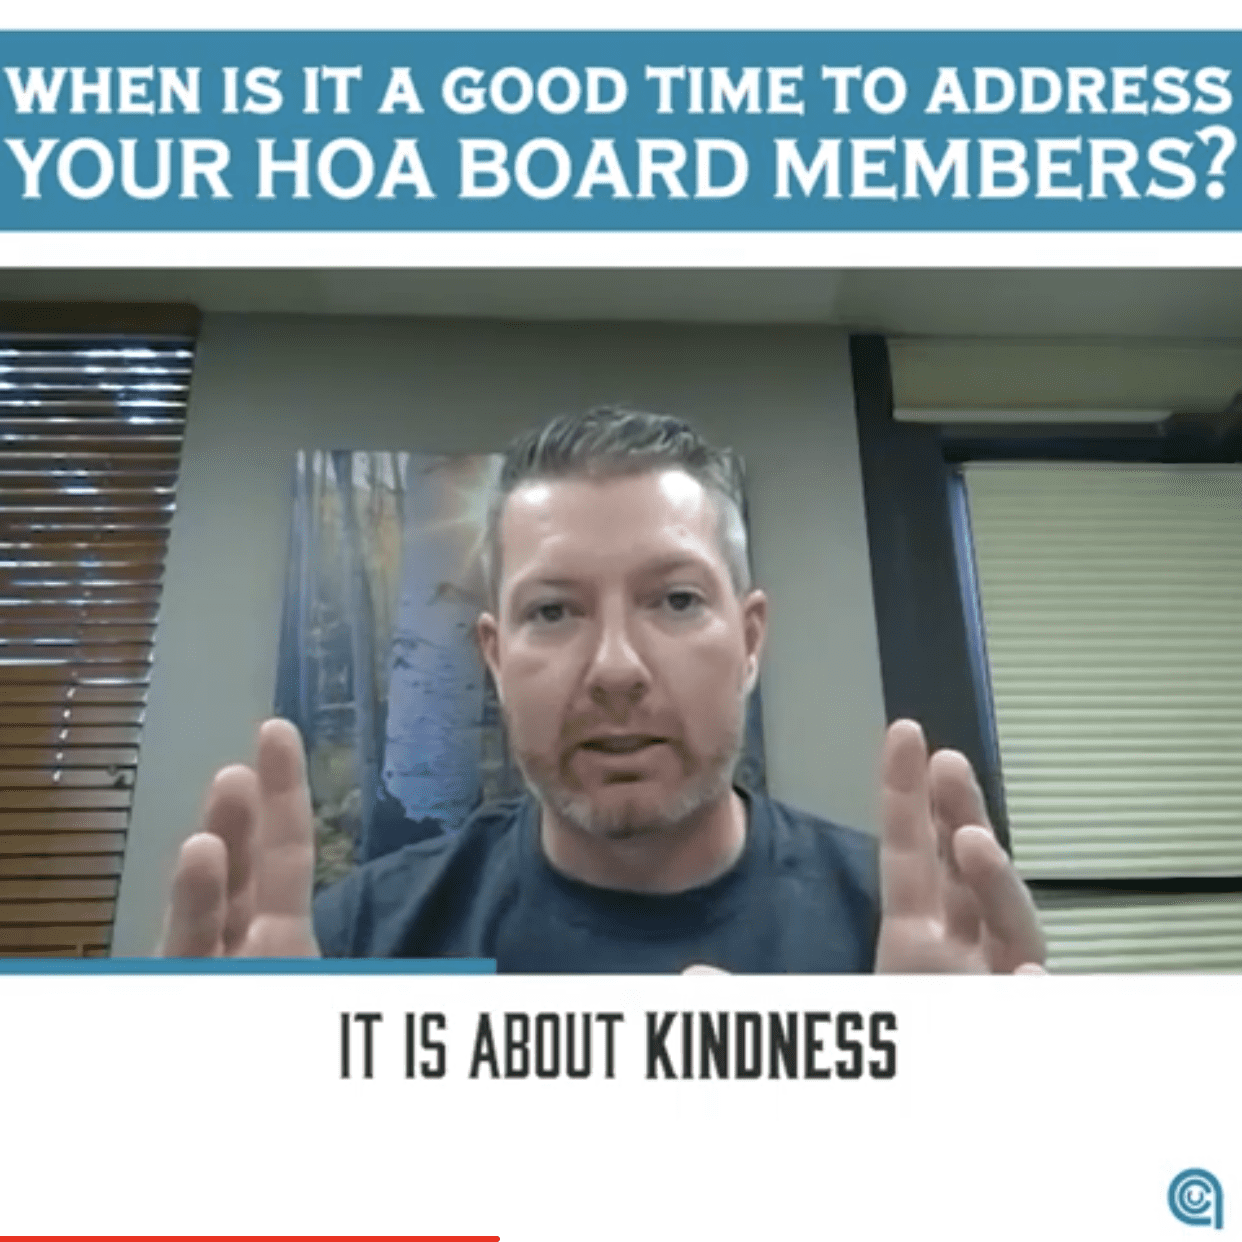 When is it a good time to address your HOA Board Members